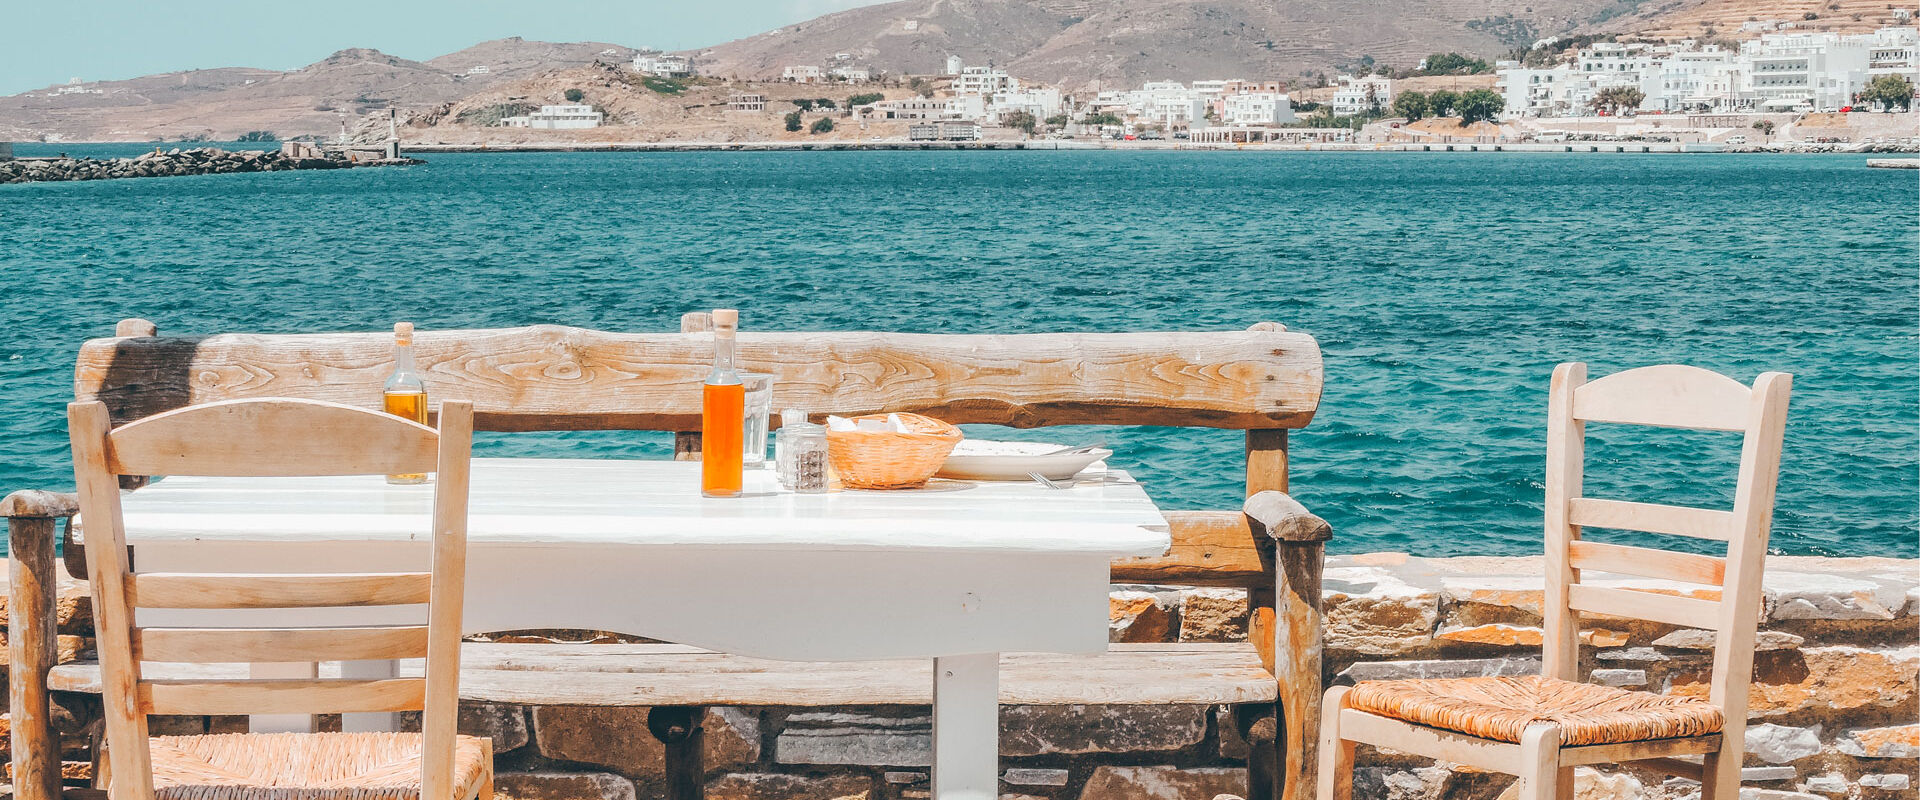 A culinary tour of Tinos includes exploring the island’s unique landscape and villages